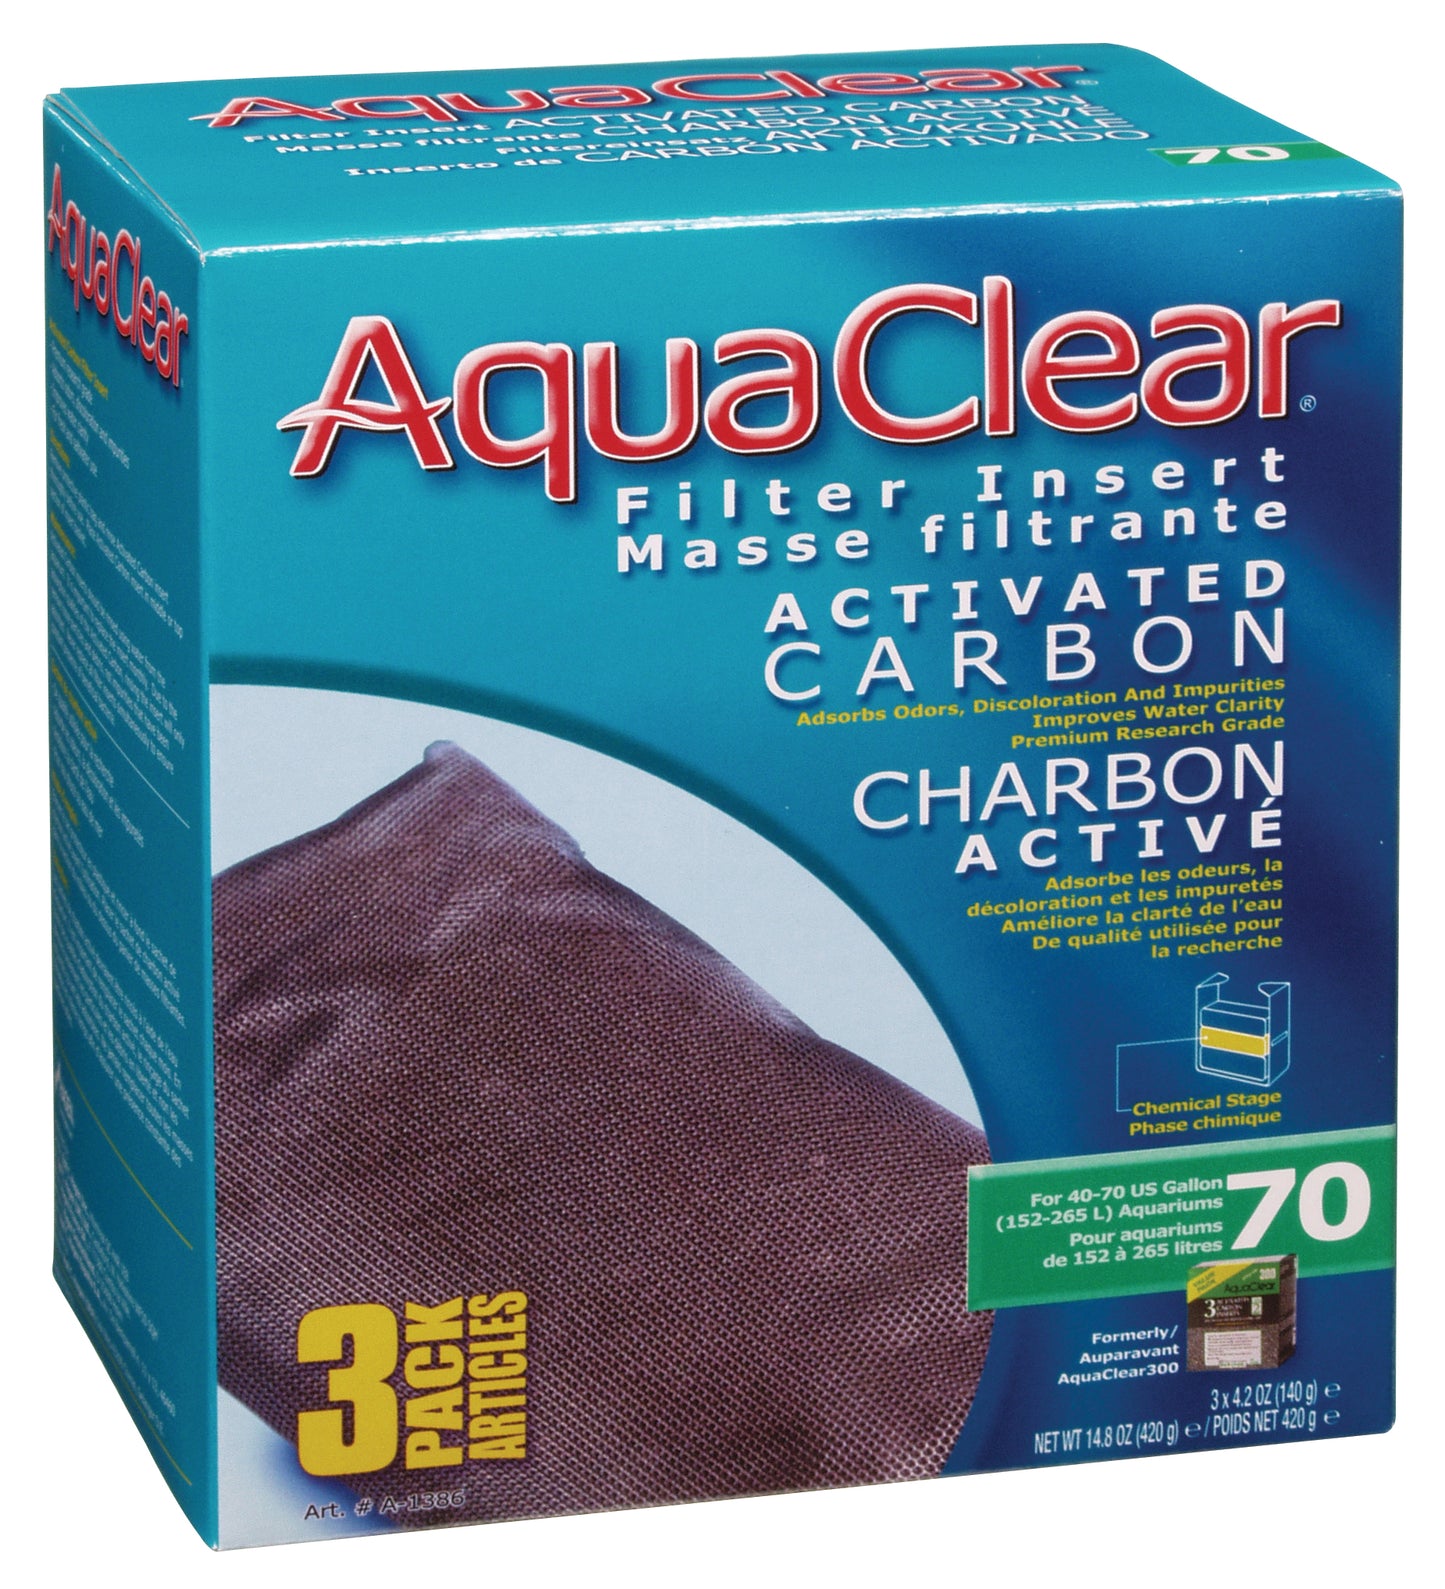 AquaClear 70 Activated Carbon Filter Insert, 3-Pack